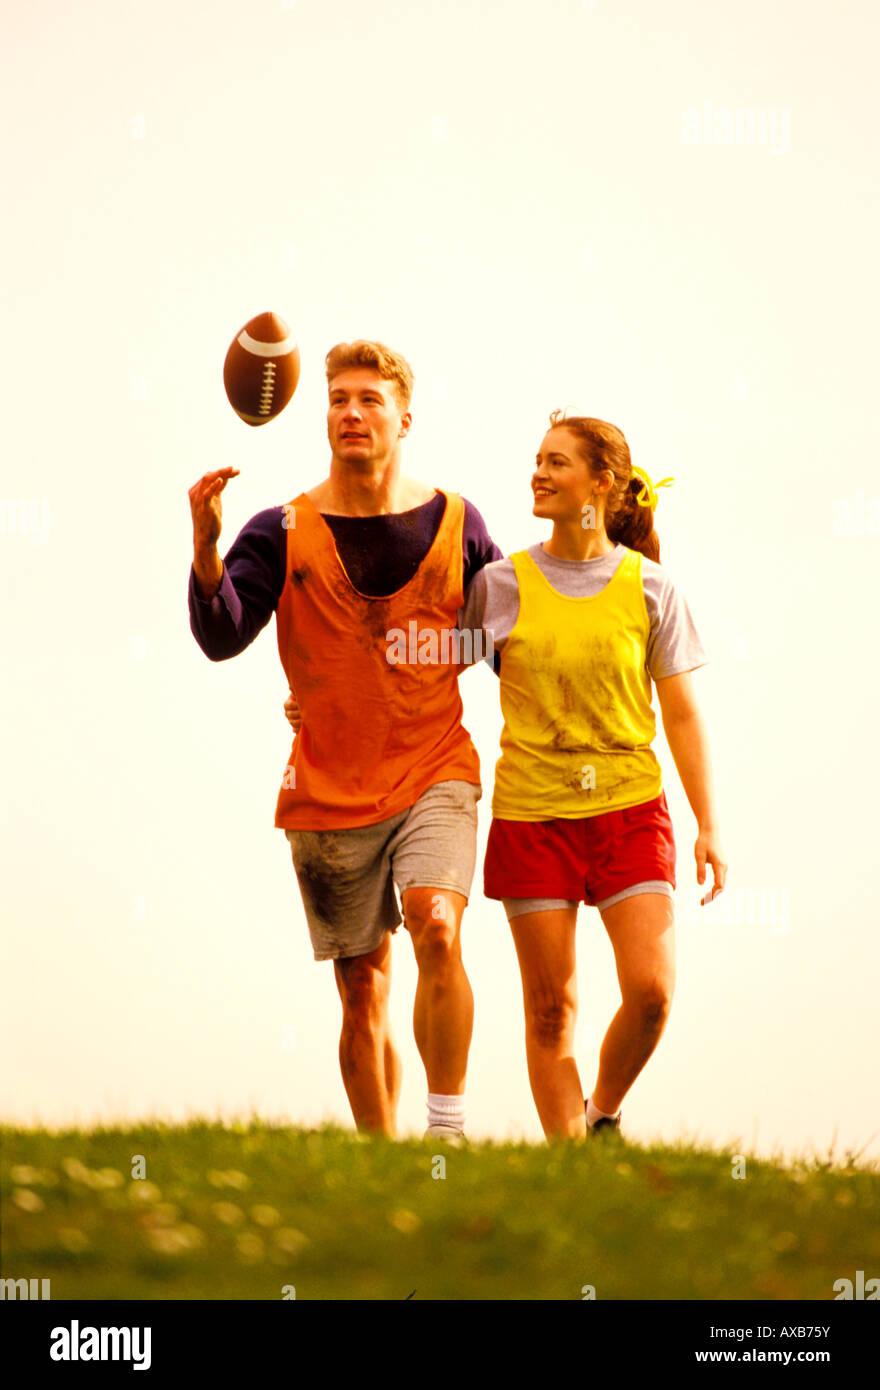 A young couple of collegians leave the field after a game of touch football Stock Photo